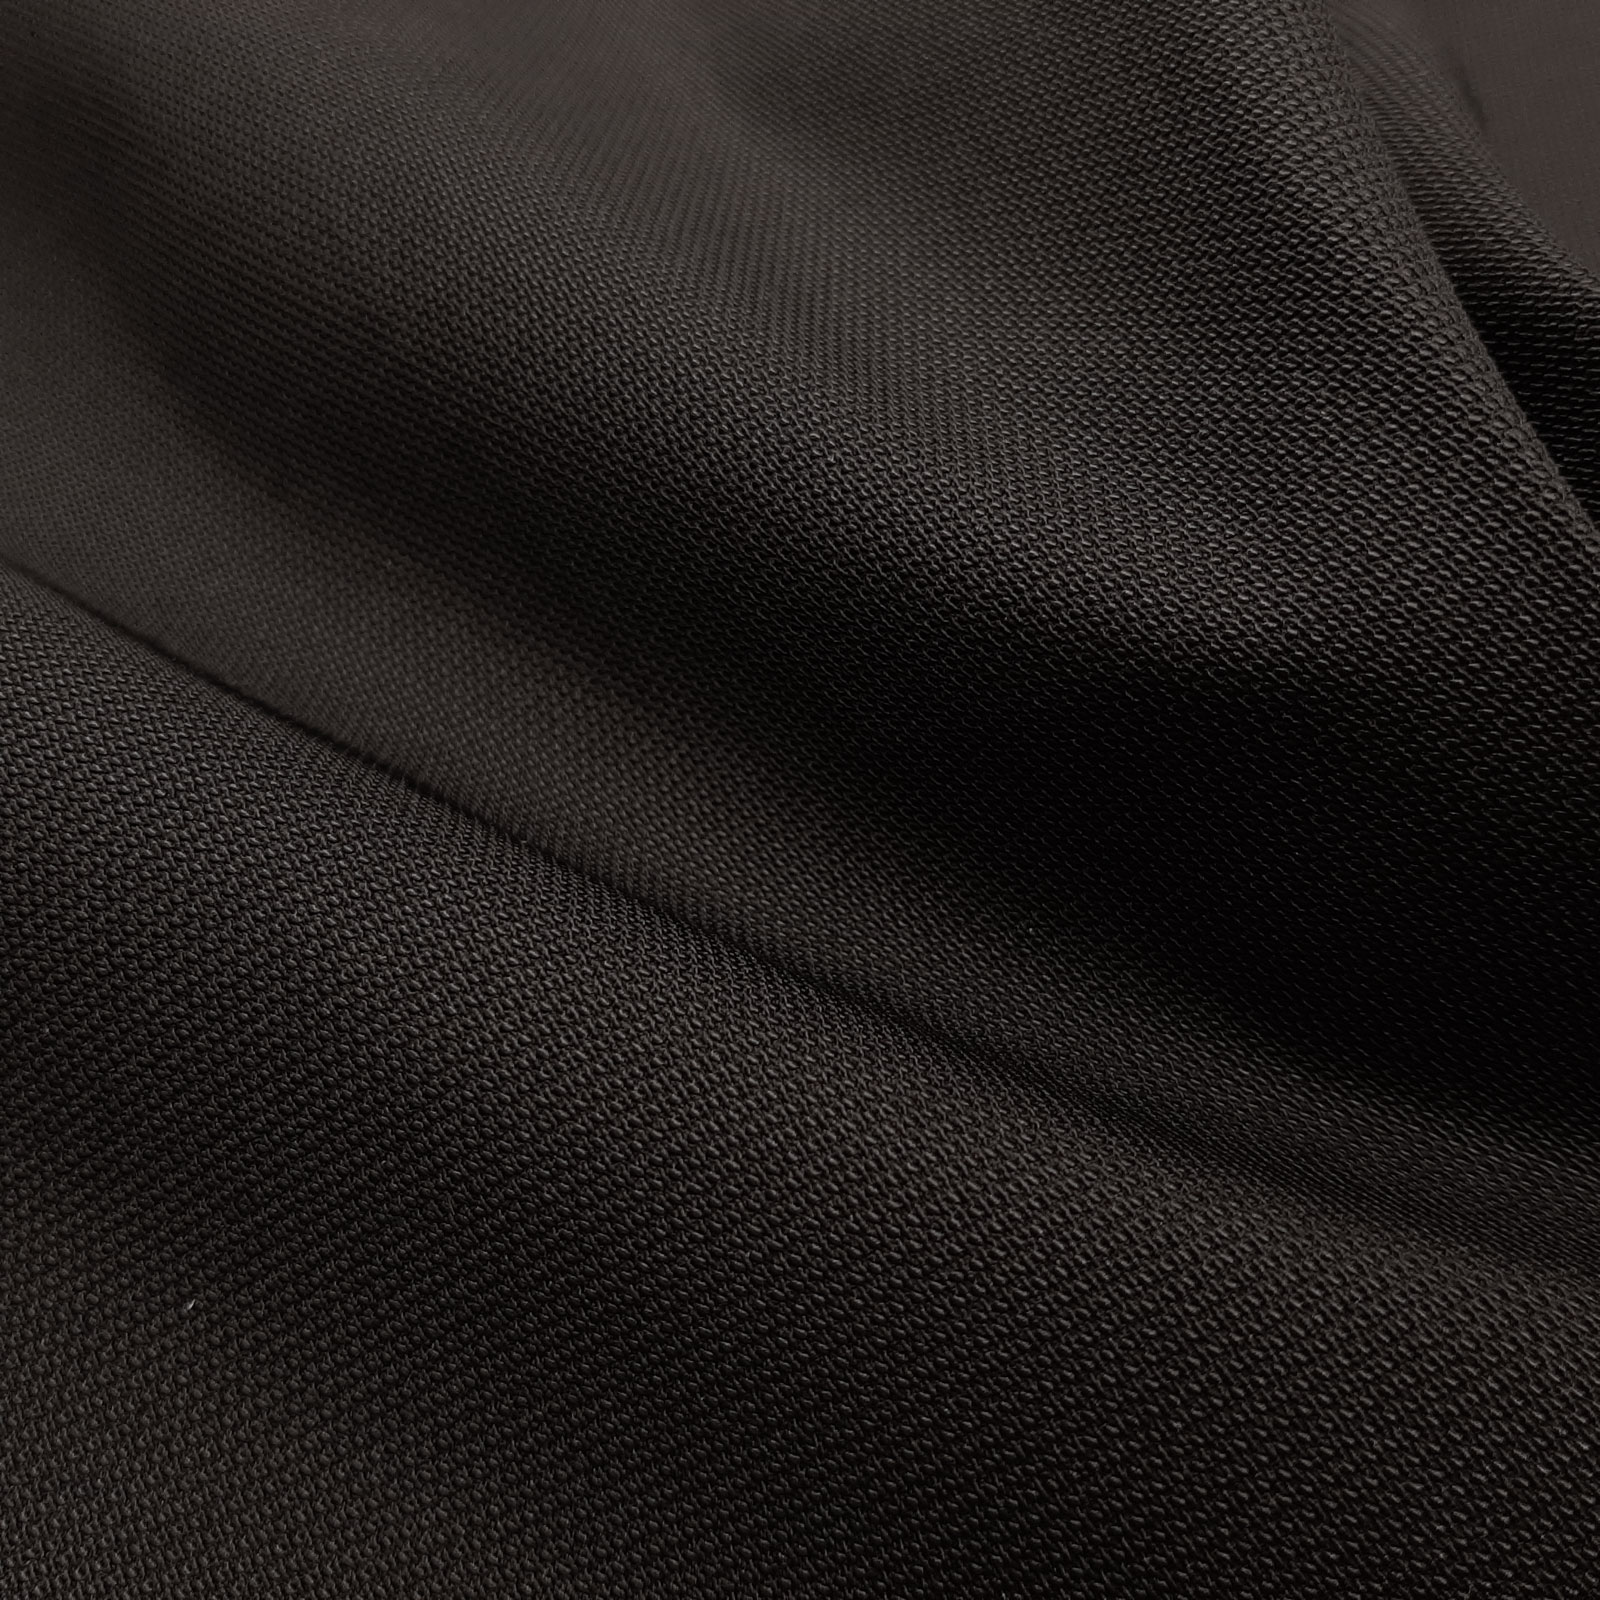 Rugged Wholesale alcantara fabric For Clothing And Accessories